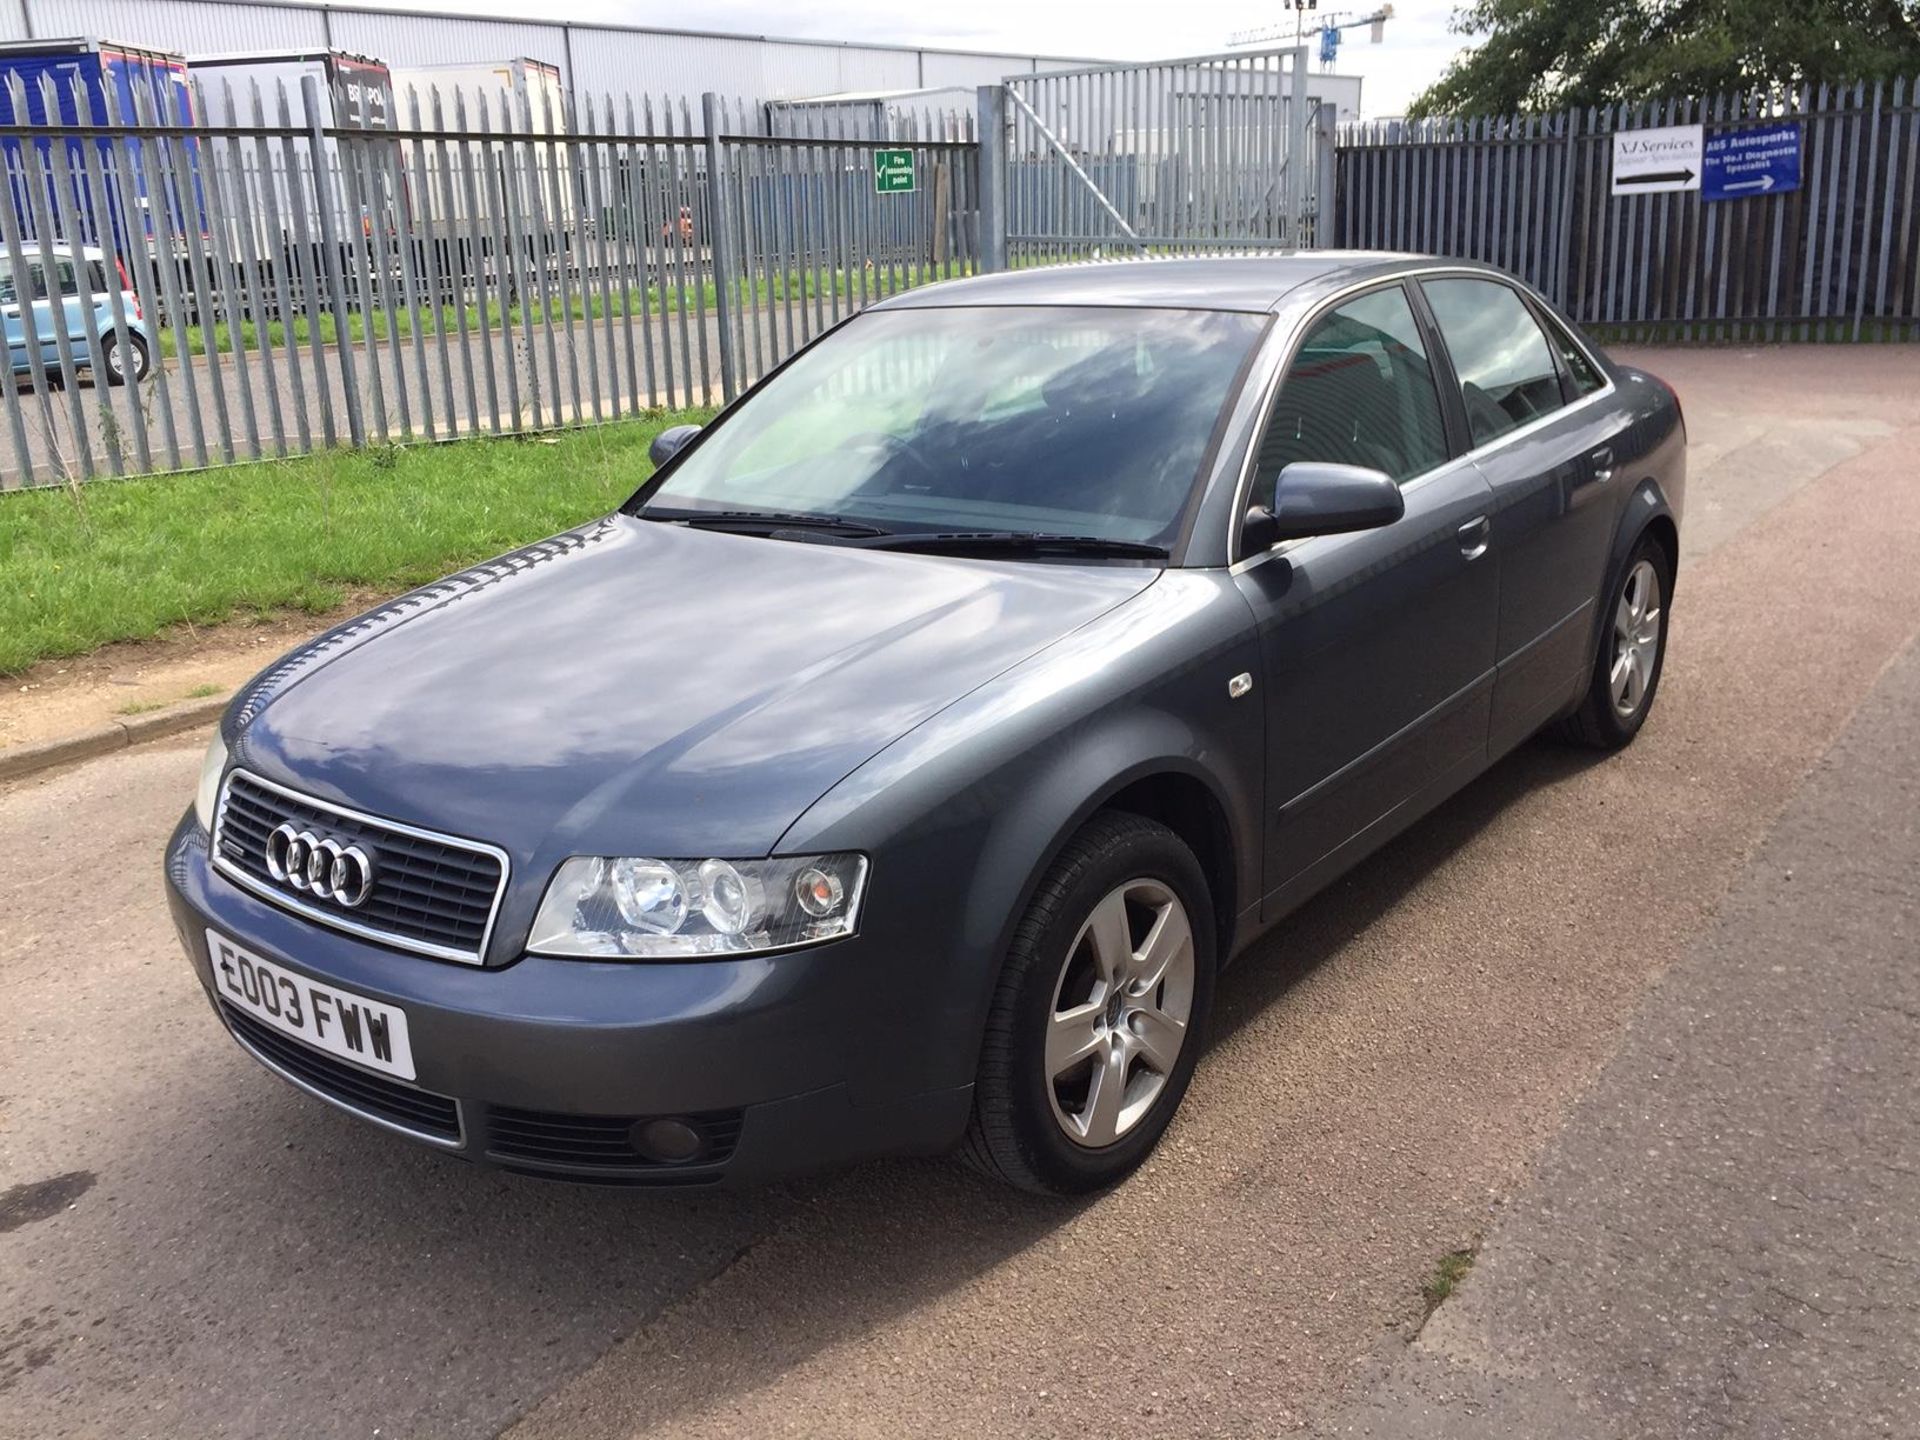 2003 Audi A4 Quattro 1.9 Tdi SE 4 Dr Saloon - CL505 - NO VAT ON THE HAMMER - Location: Corby, Northa - Image 6 of 15